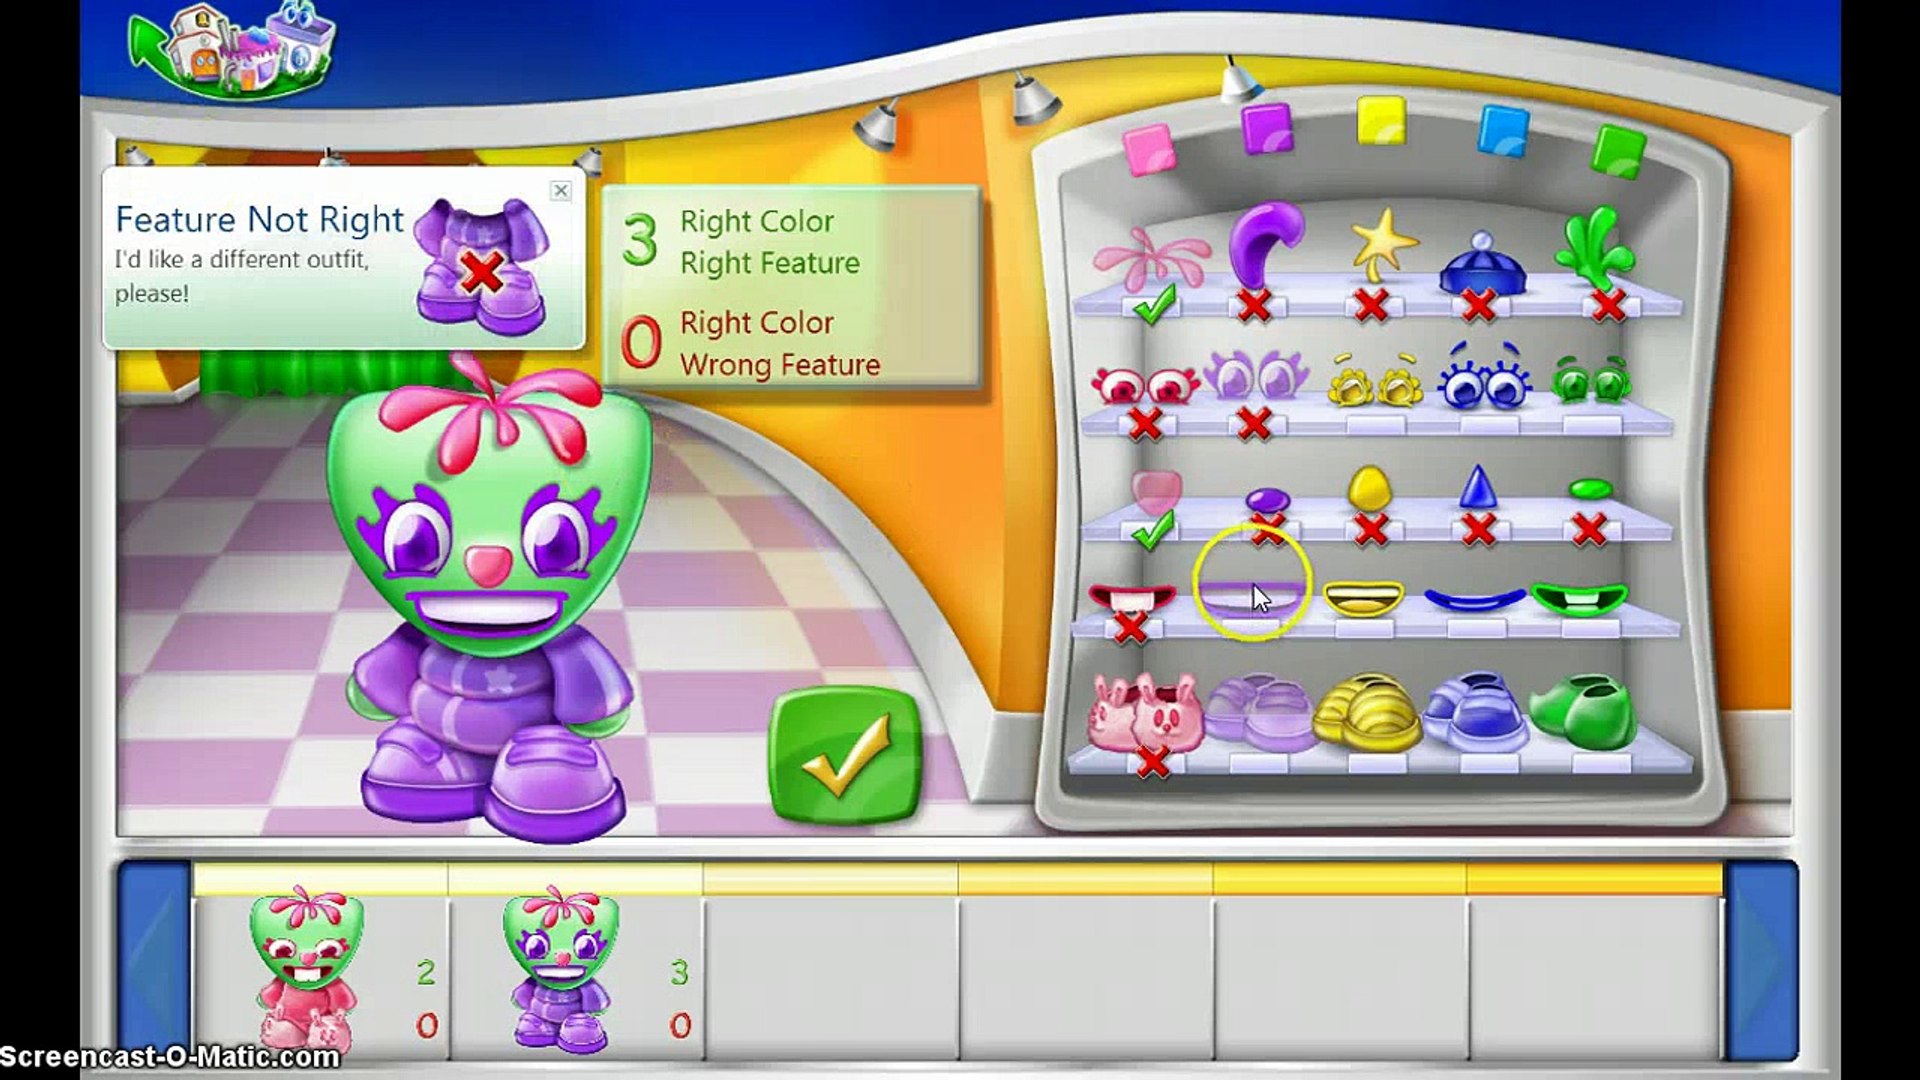 How To Install Purble Place Game In Laptop